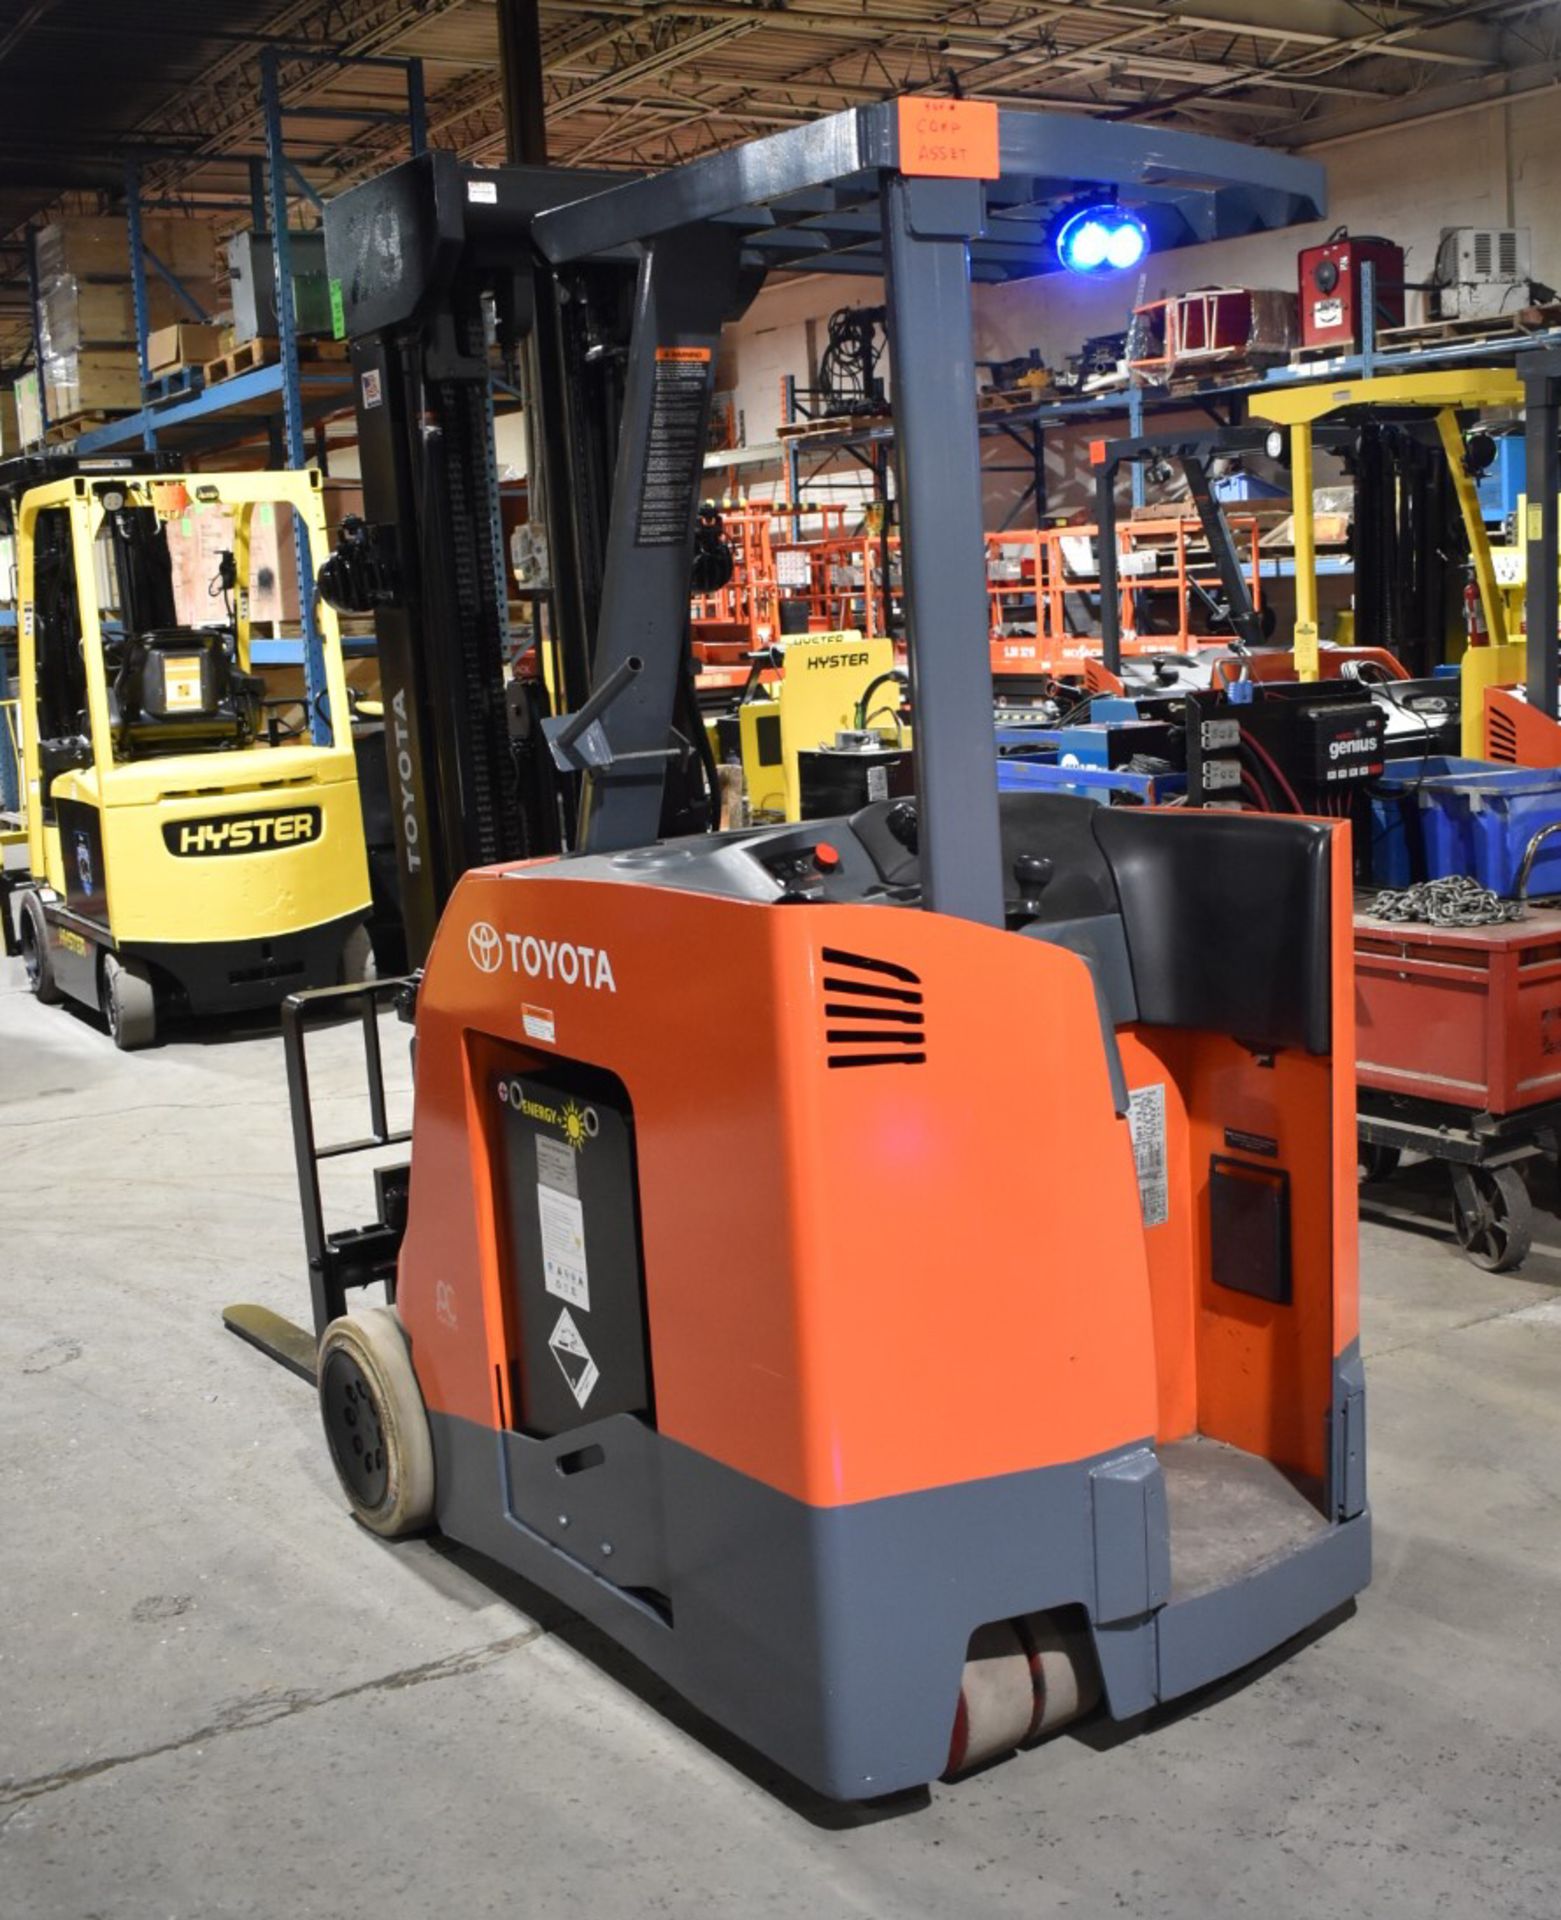 TOYOTA (2017) 8BNCU20 STAND ON ELECTRIC FORKLIFT WITH, 4,000LBS CAPACITY, 36V BATTERY, 276.5" MAX - Image 2 of 7